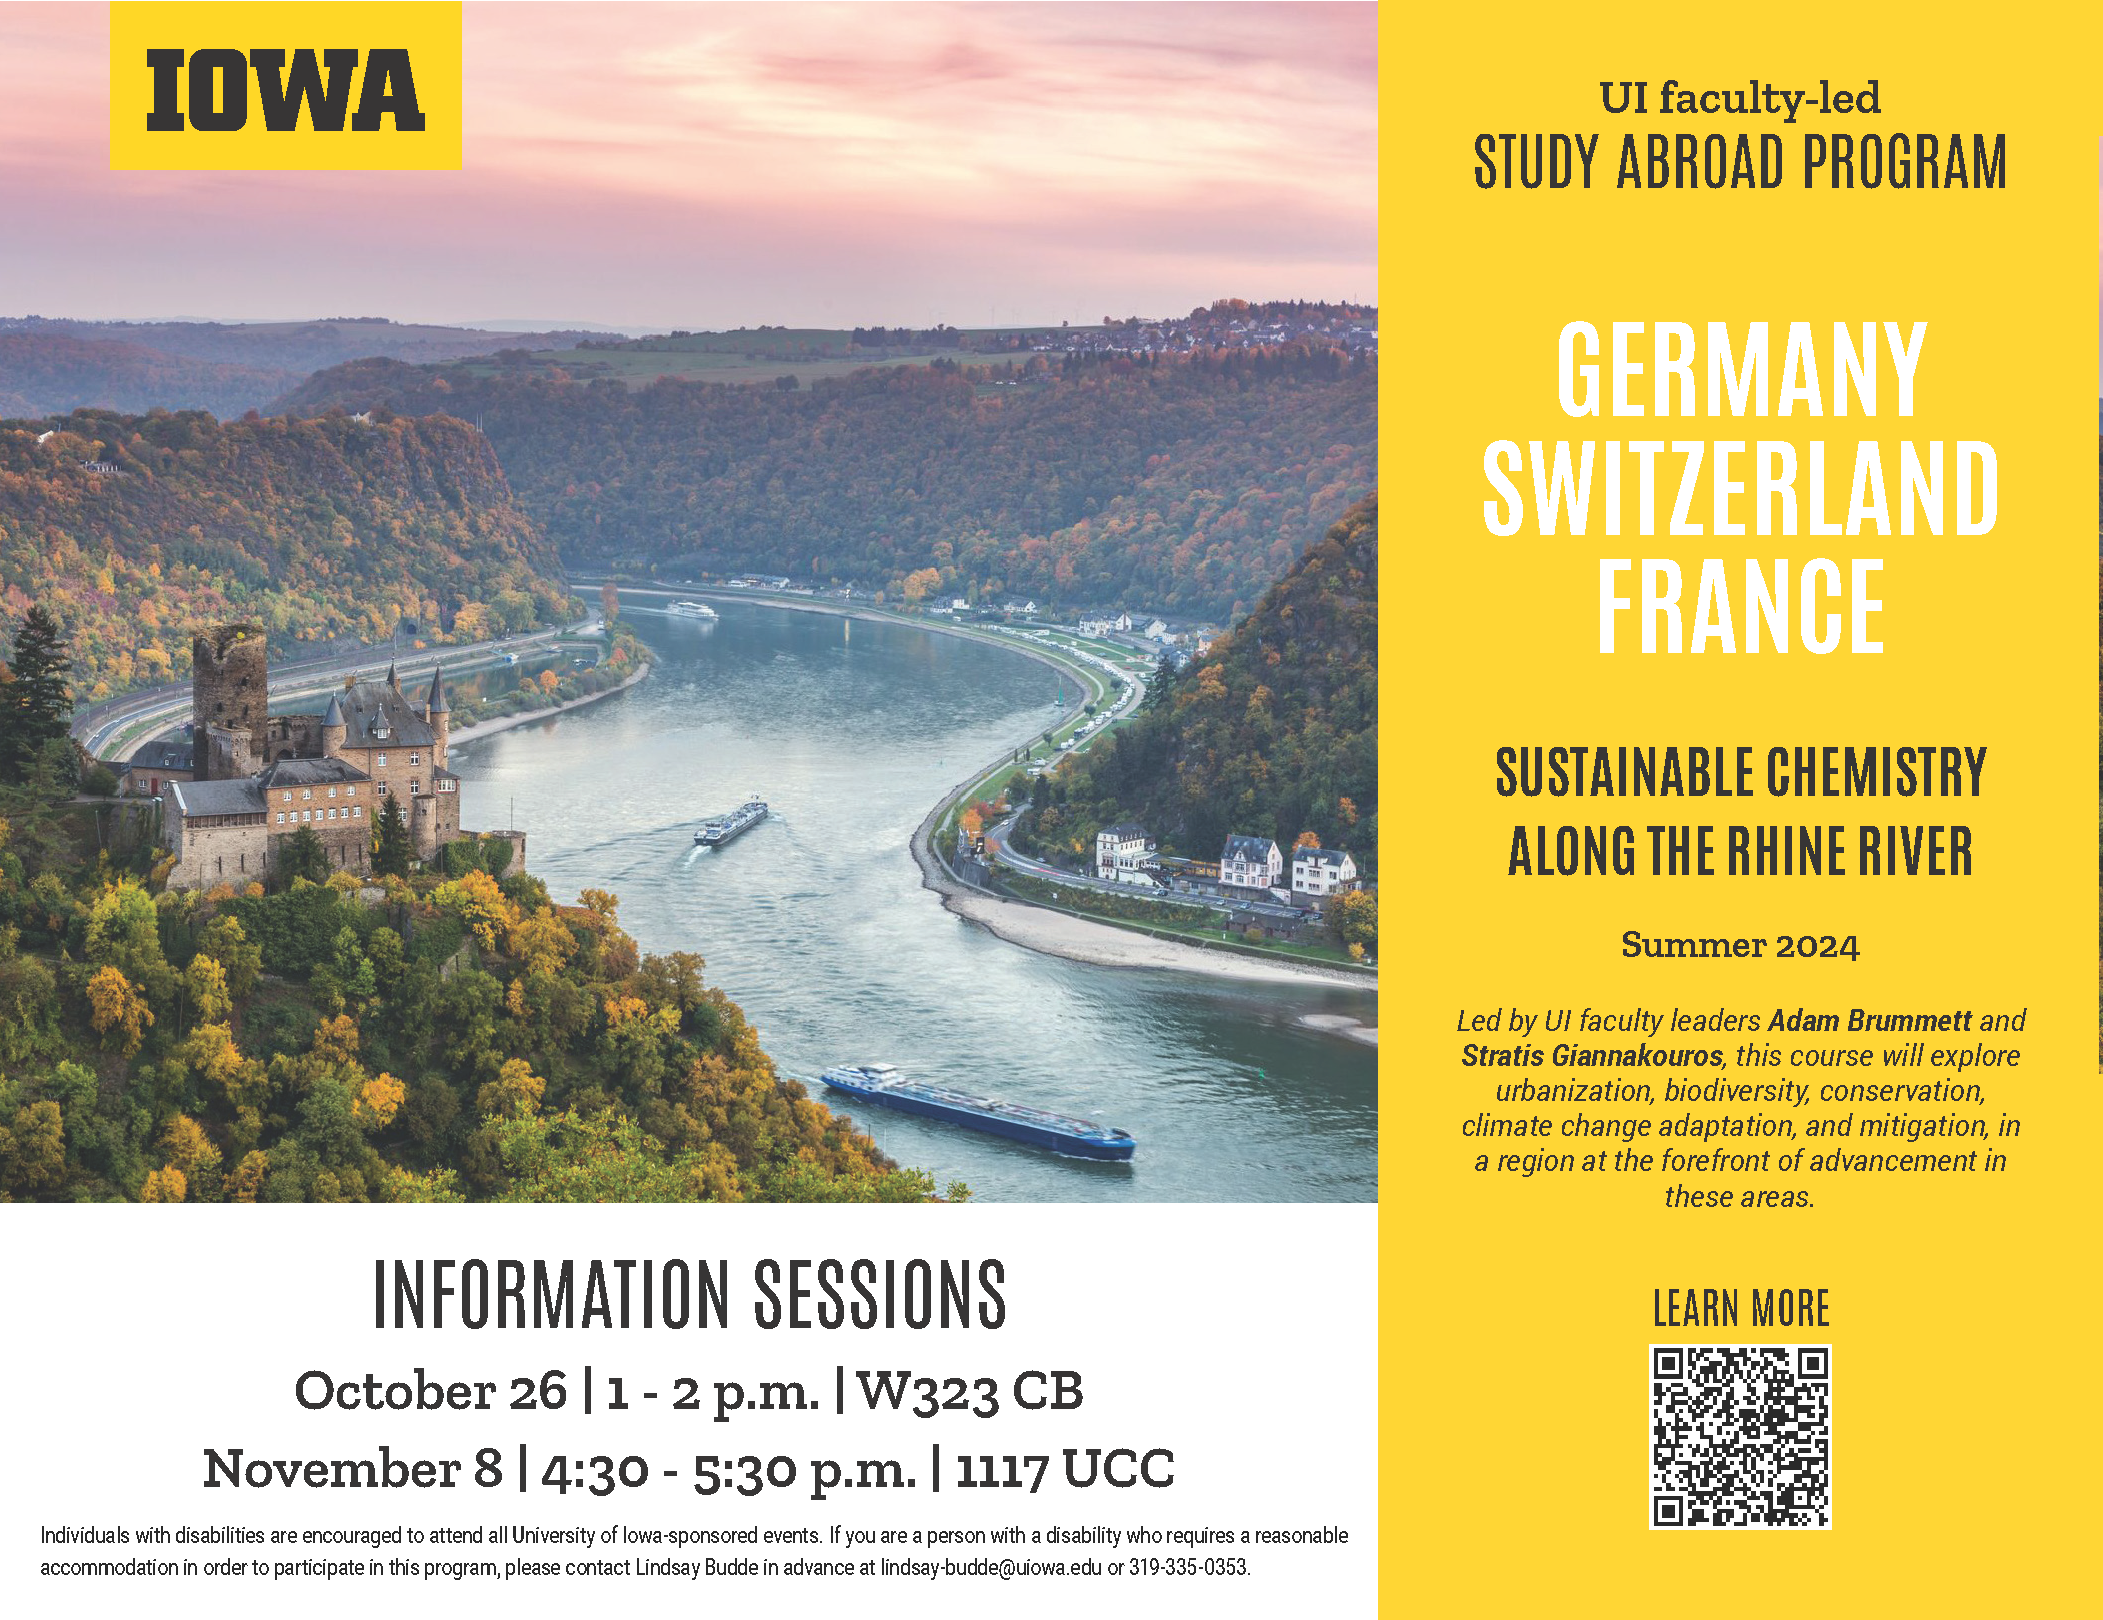 Sustainable Chemistry Along the Rhine River Abroad, Information Sessions